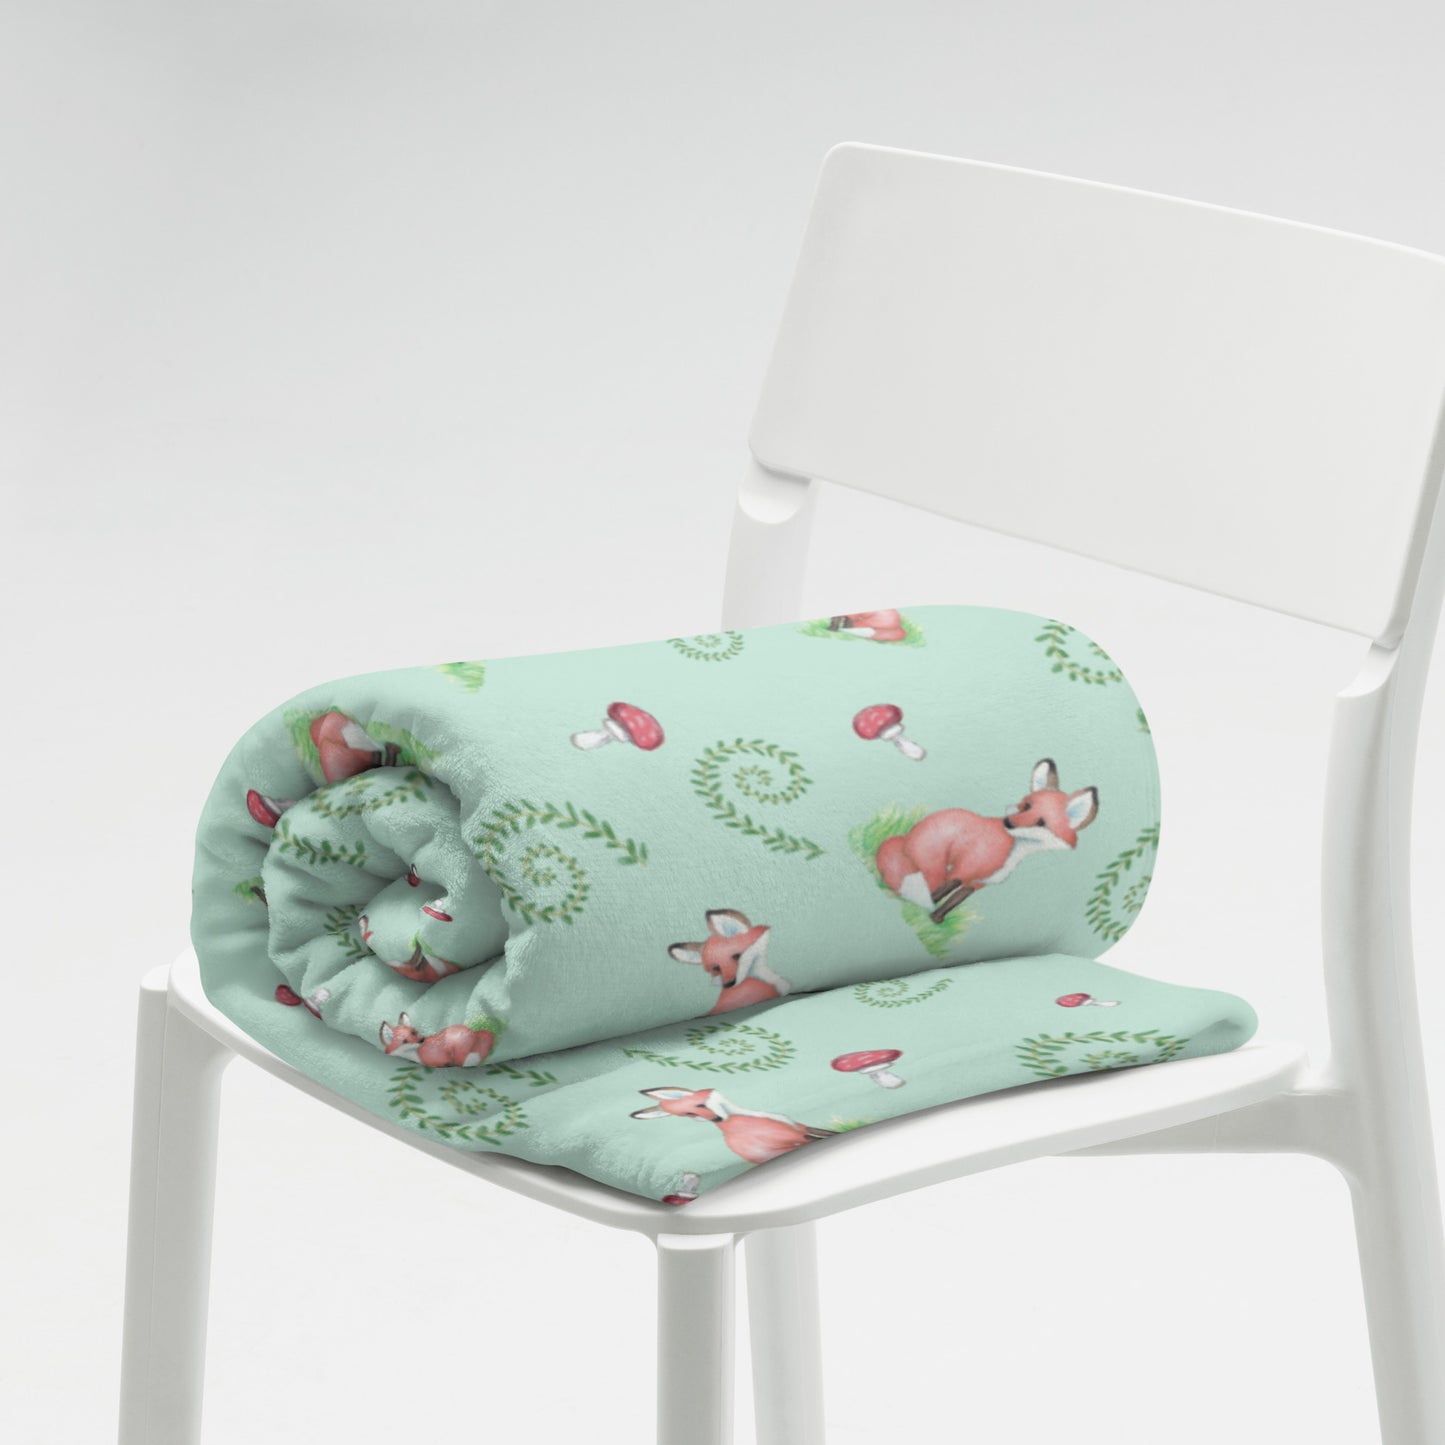 60 by 80 inch watercolor forest fox patterned blanket. Made of soft and fluffy polyester. Has foxes, mushrooms, and ferns on light green background. White underside. Machine-washable, hypoallergenic, and flame retardant. Shown rolled on a white chair.